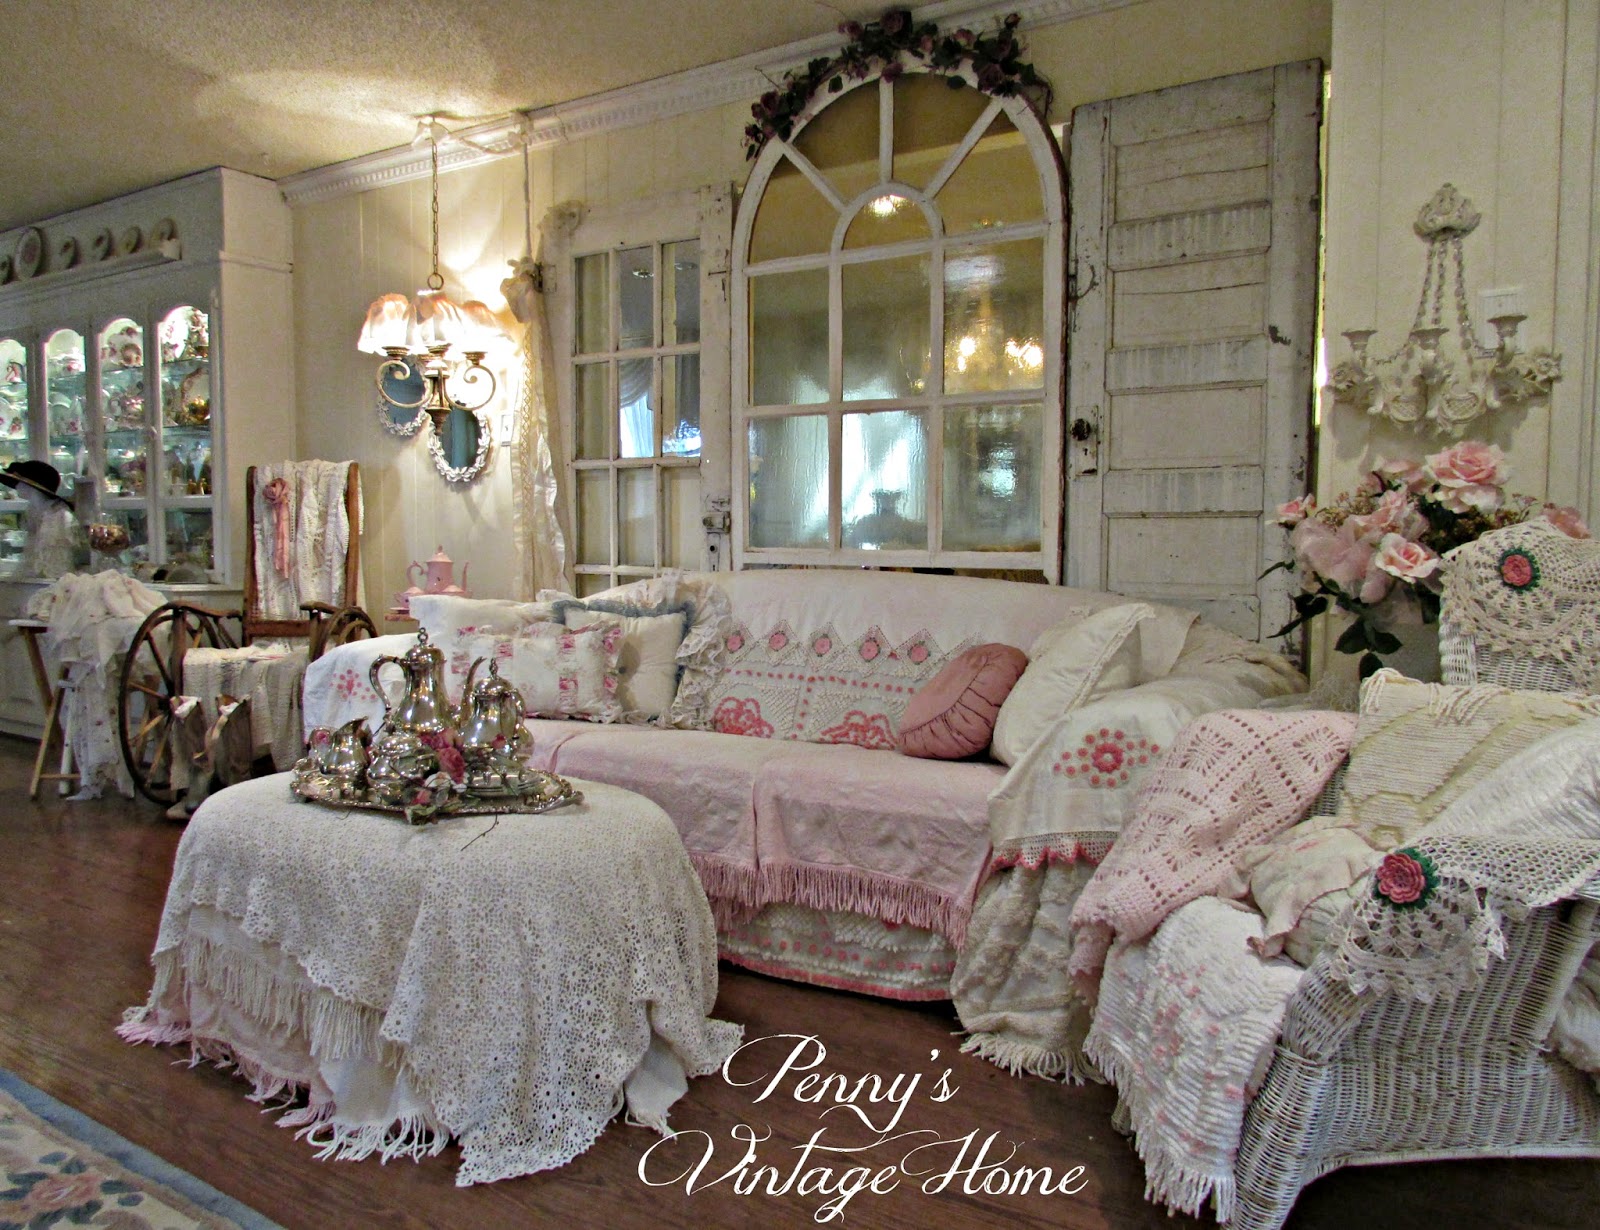 Penny's Vintage Home: Making Room for the Christmas Tree